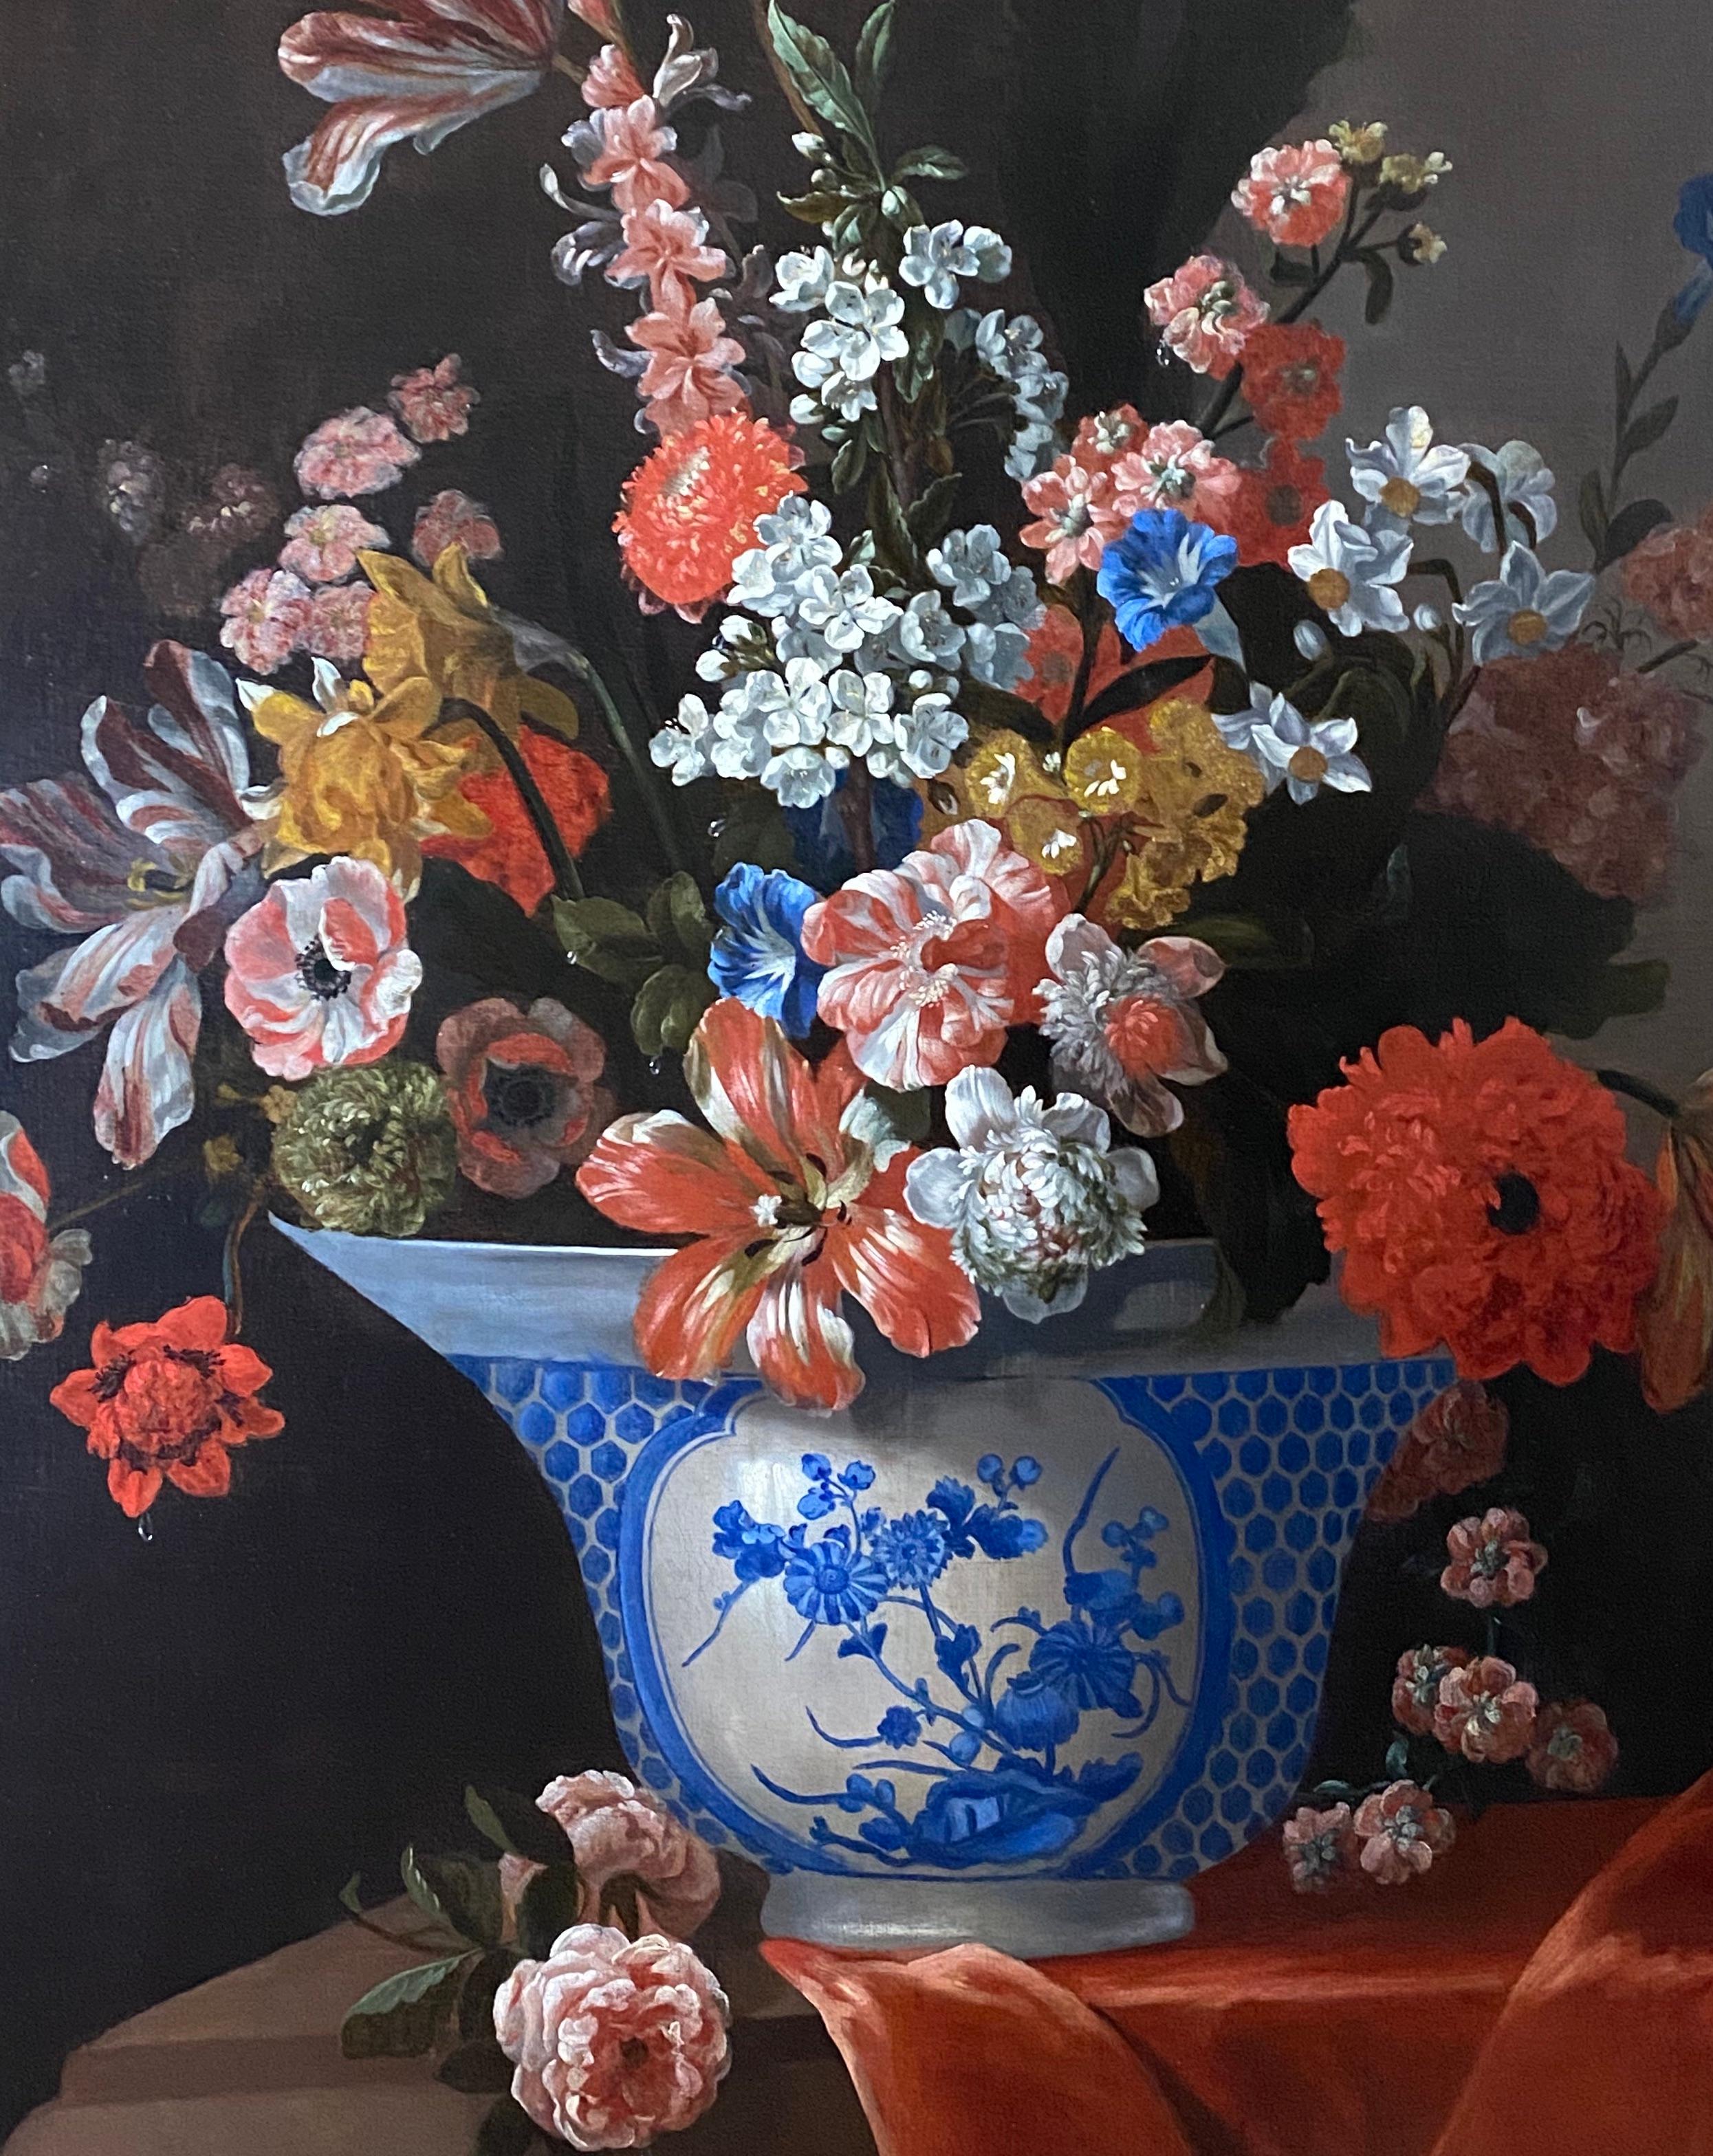 EARLY 18TH CENTURY DUTCH FLORAL STILL LIFE - ATTRIBUTED TO PIETER CASTEELS III (1684-1749)

Fine, monumental and highly decorative early 18th century Dutch floral still life attributed to Pieter Casteels (1684–1749)  
A collection of intensely